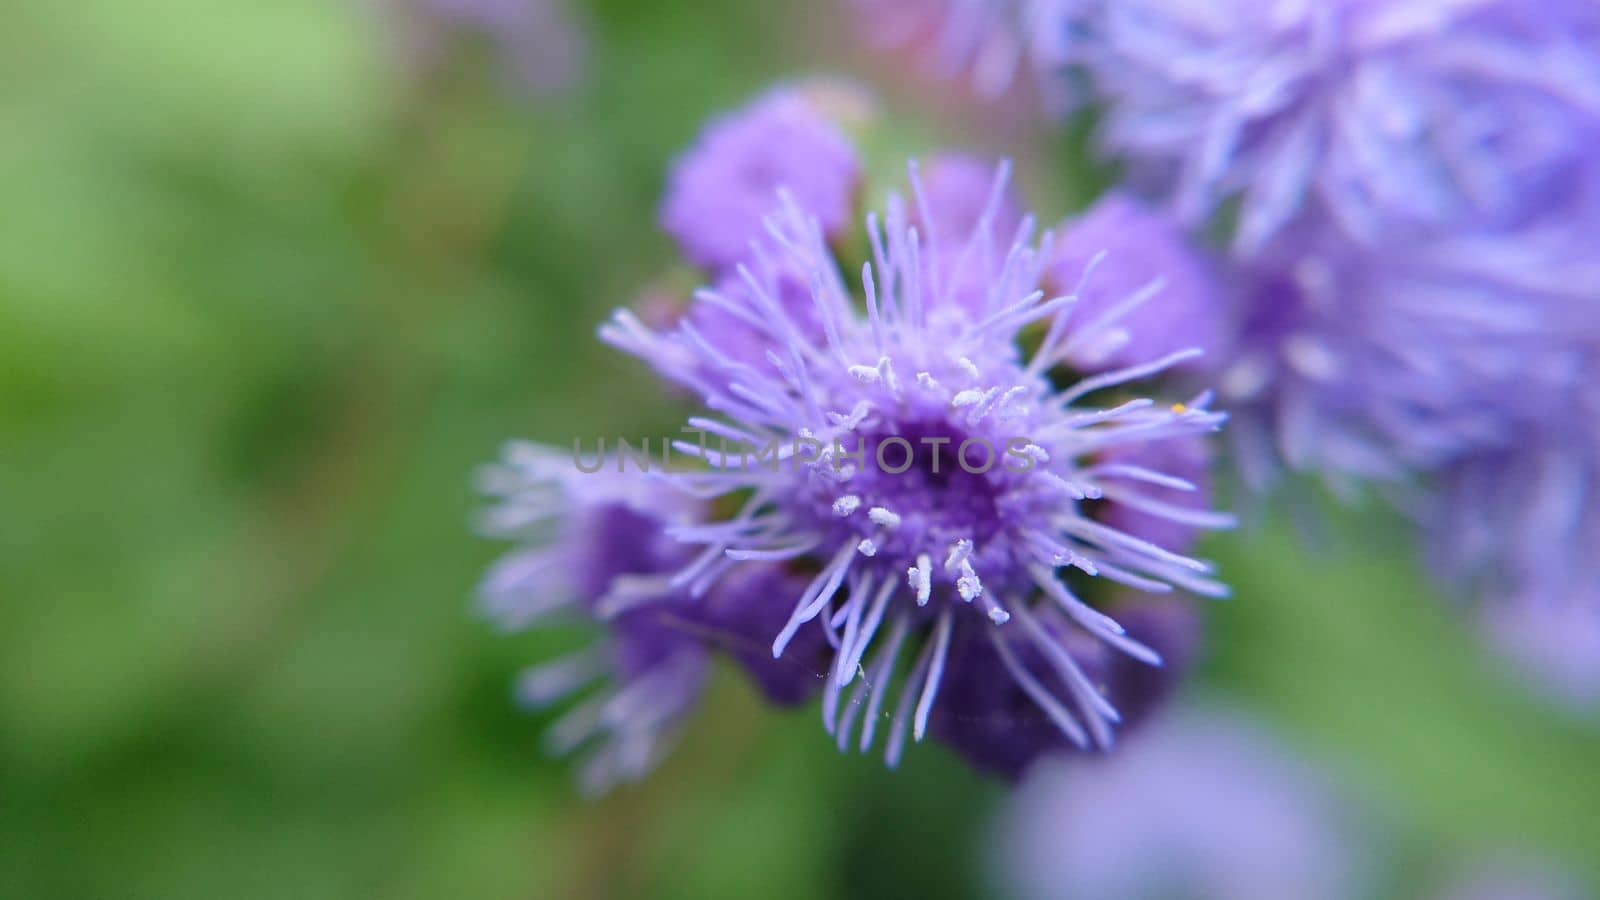 Fluffy purple flowers of ageratum Houston on a grassy background.Macrophotography.Texture or background.Selective focus.